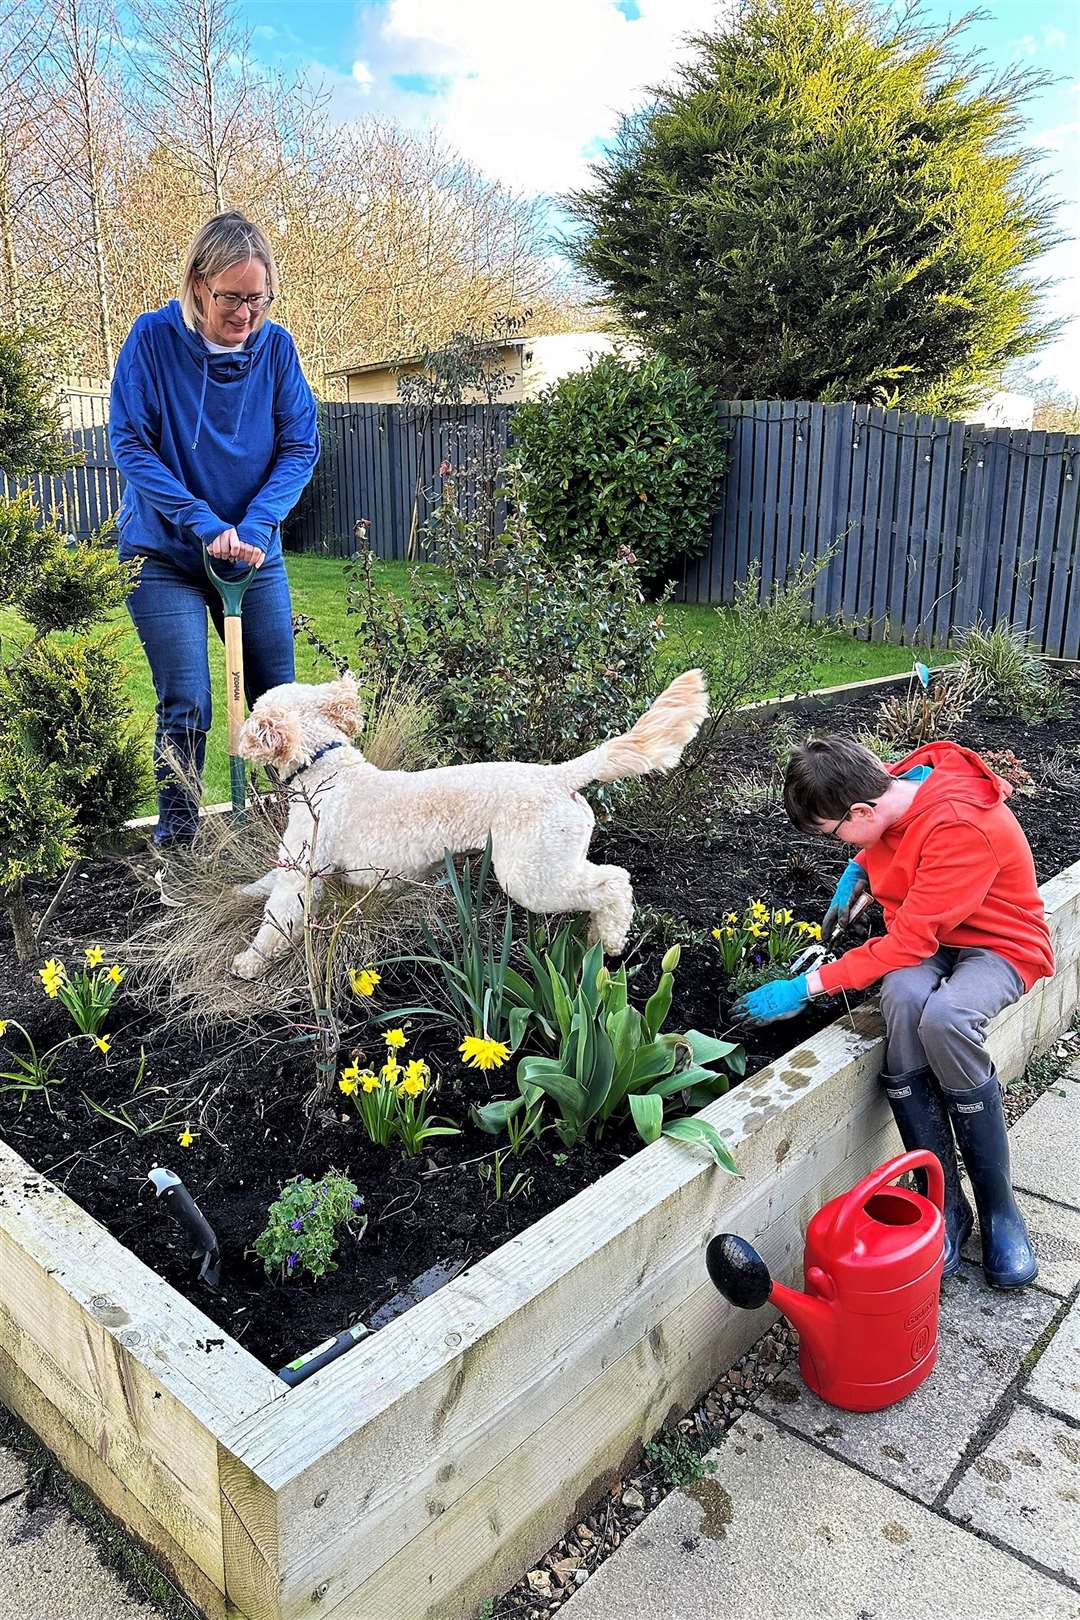 Dawn Lochhead, Scottish Water's Flood Risk Manager, in the garden of her Midlothian home with son Harris and pet dog, Rex. Dawn is an expert on how gardens can be optimised to make optimal use of water and help prevent flooding during rainy weather and to reduce water use during potential drought periods.